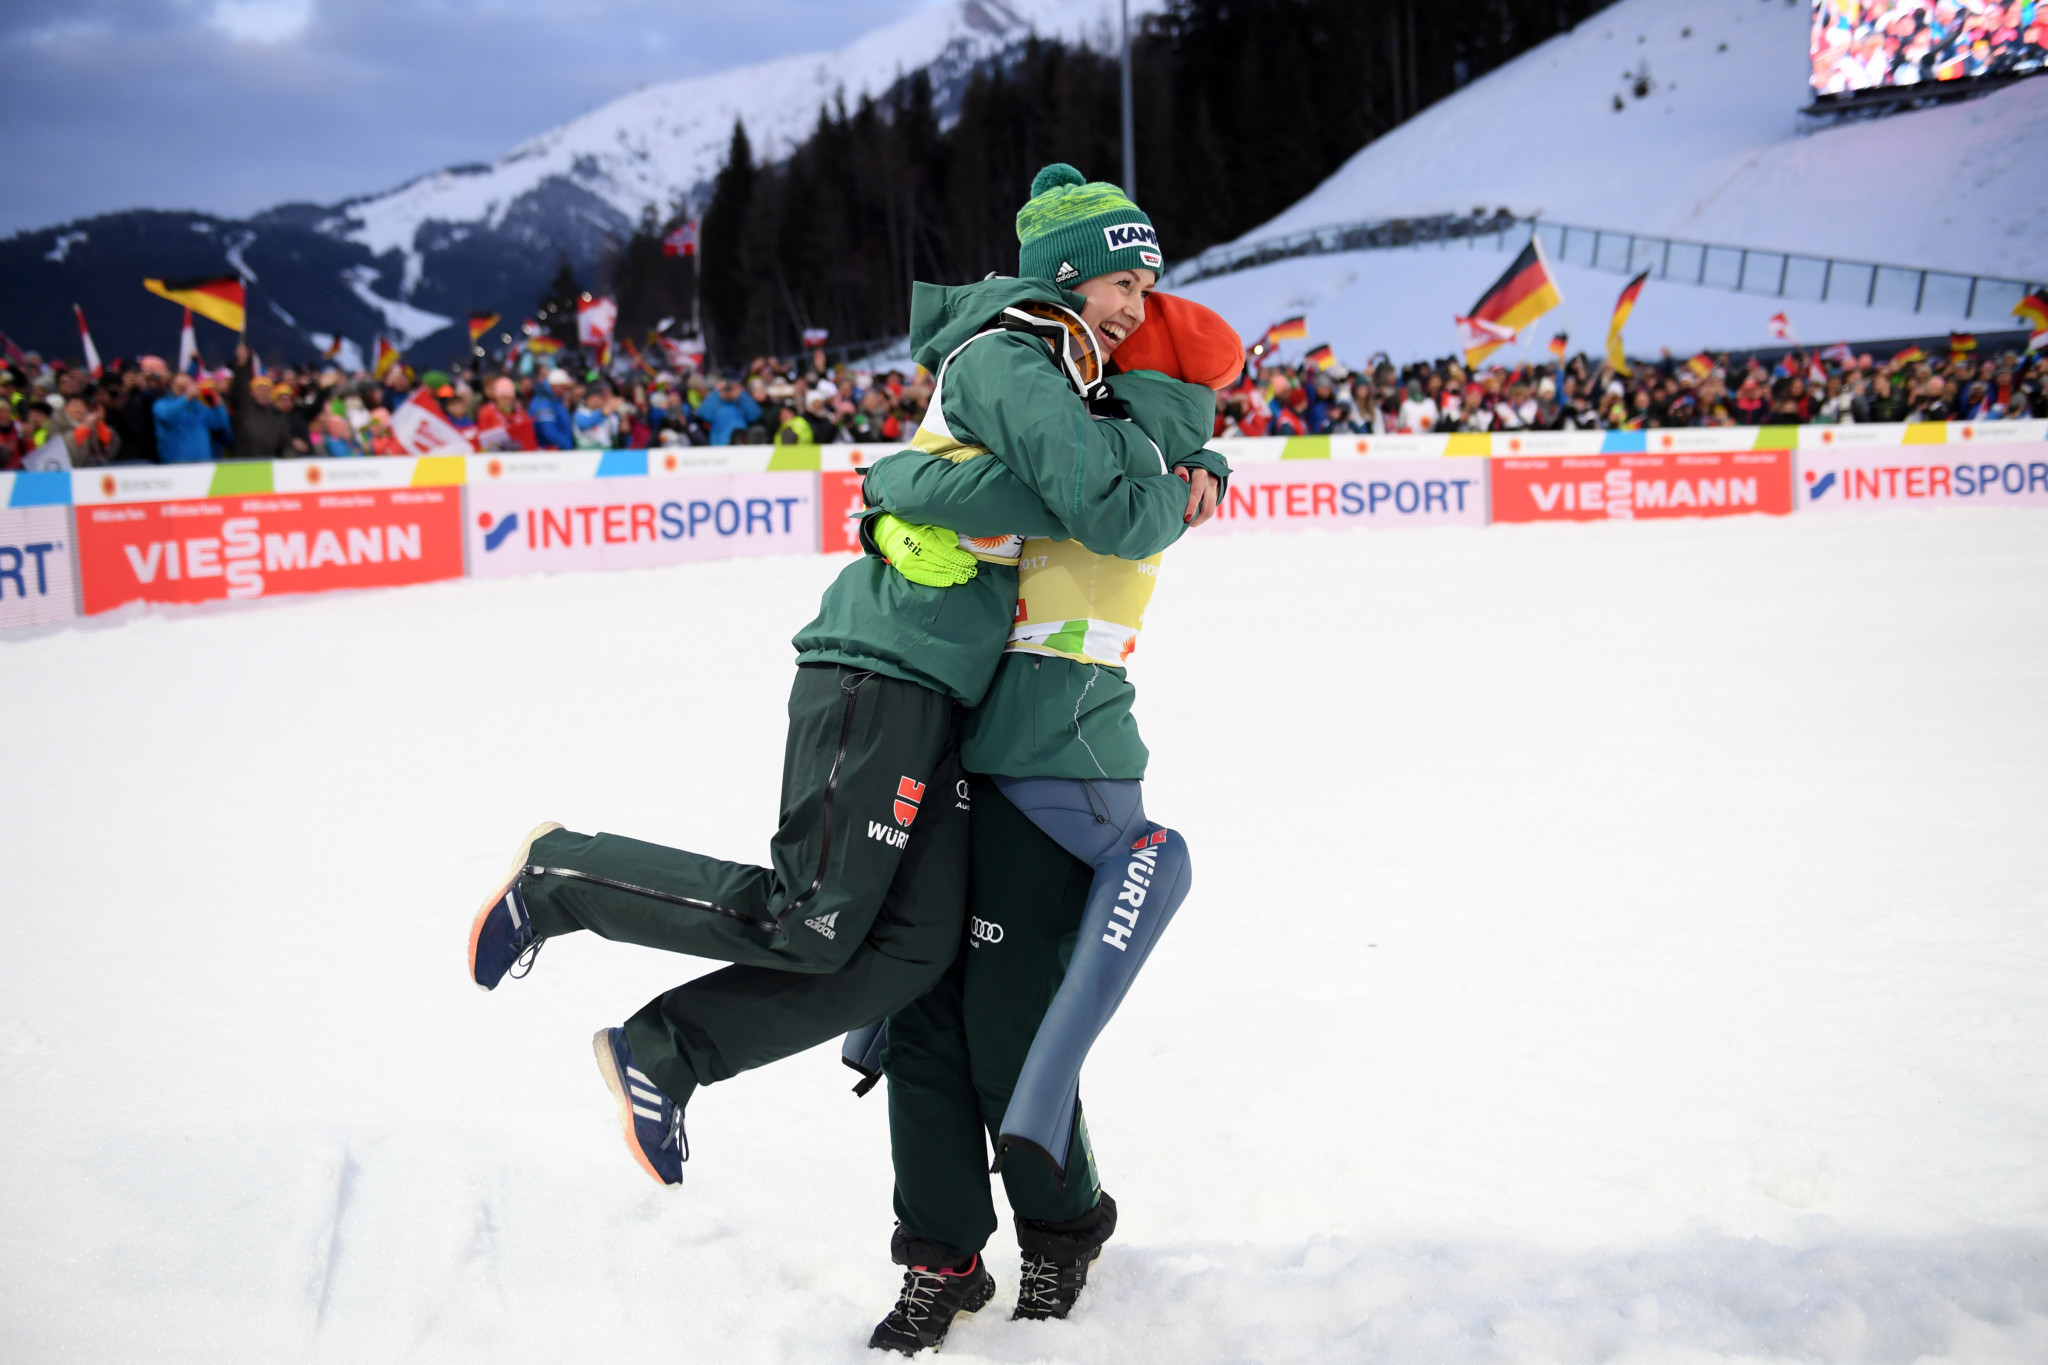 Germany celebrated victory in the mixed team ski jumping event ©Getty Images